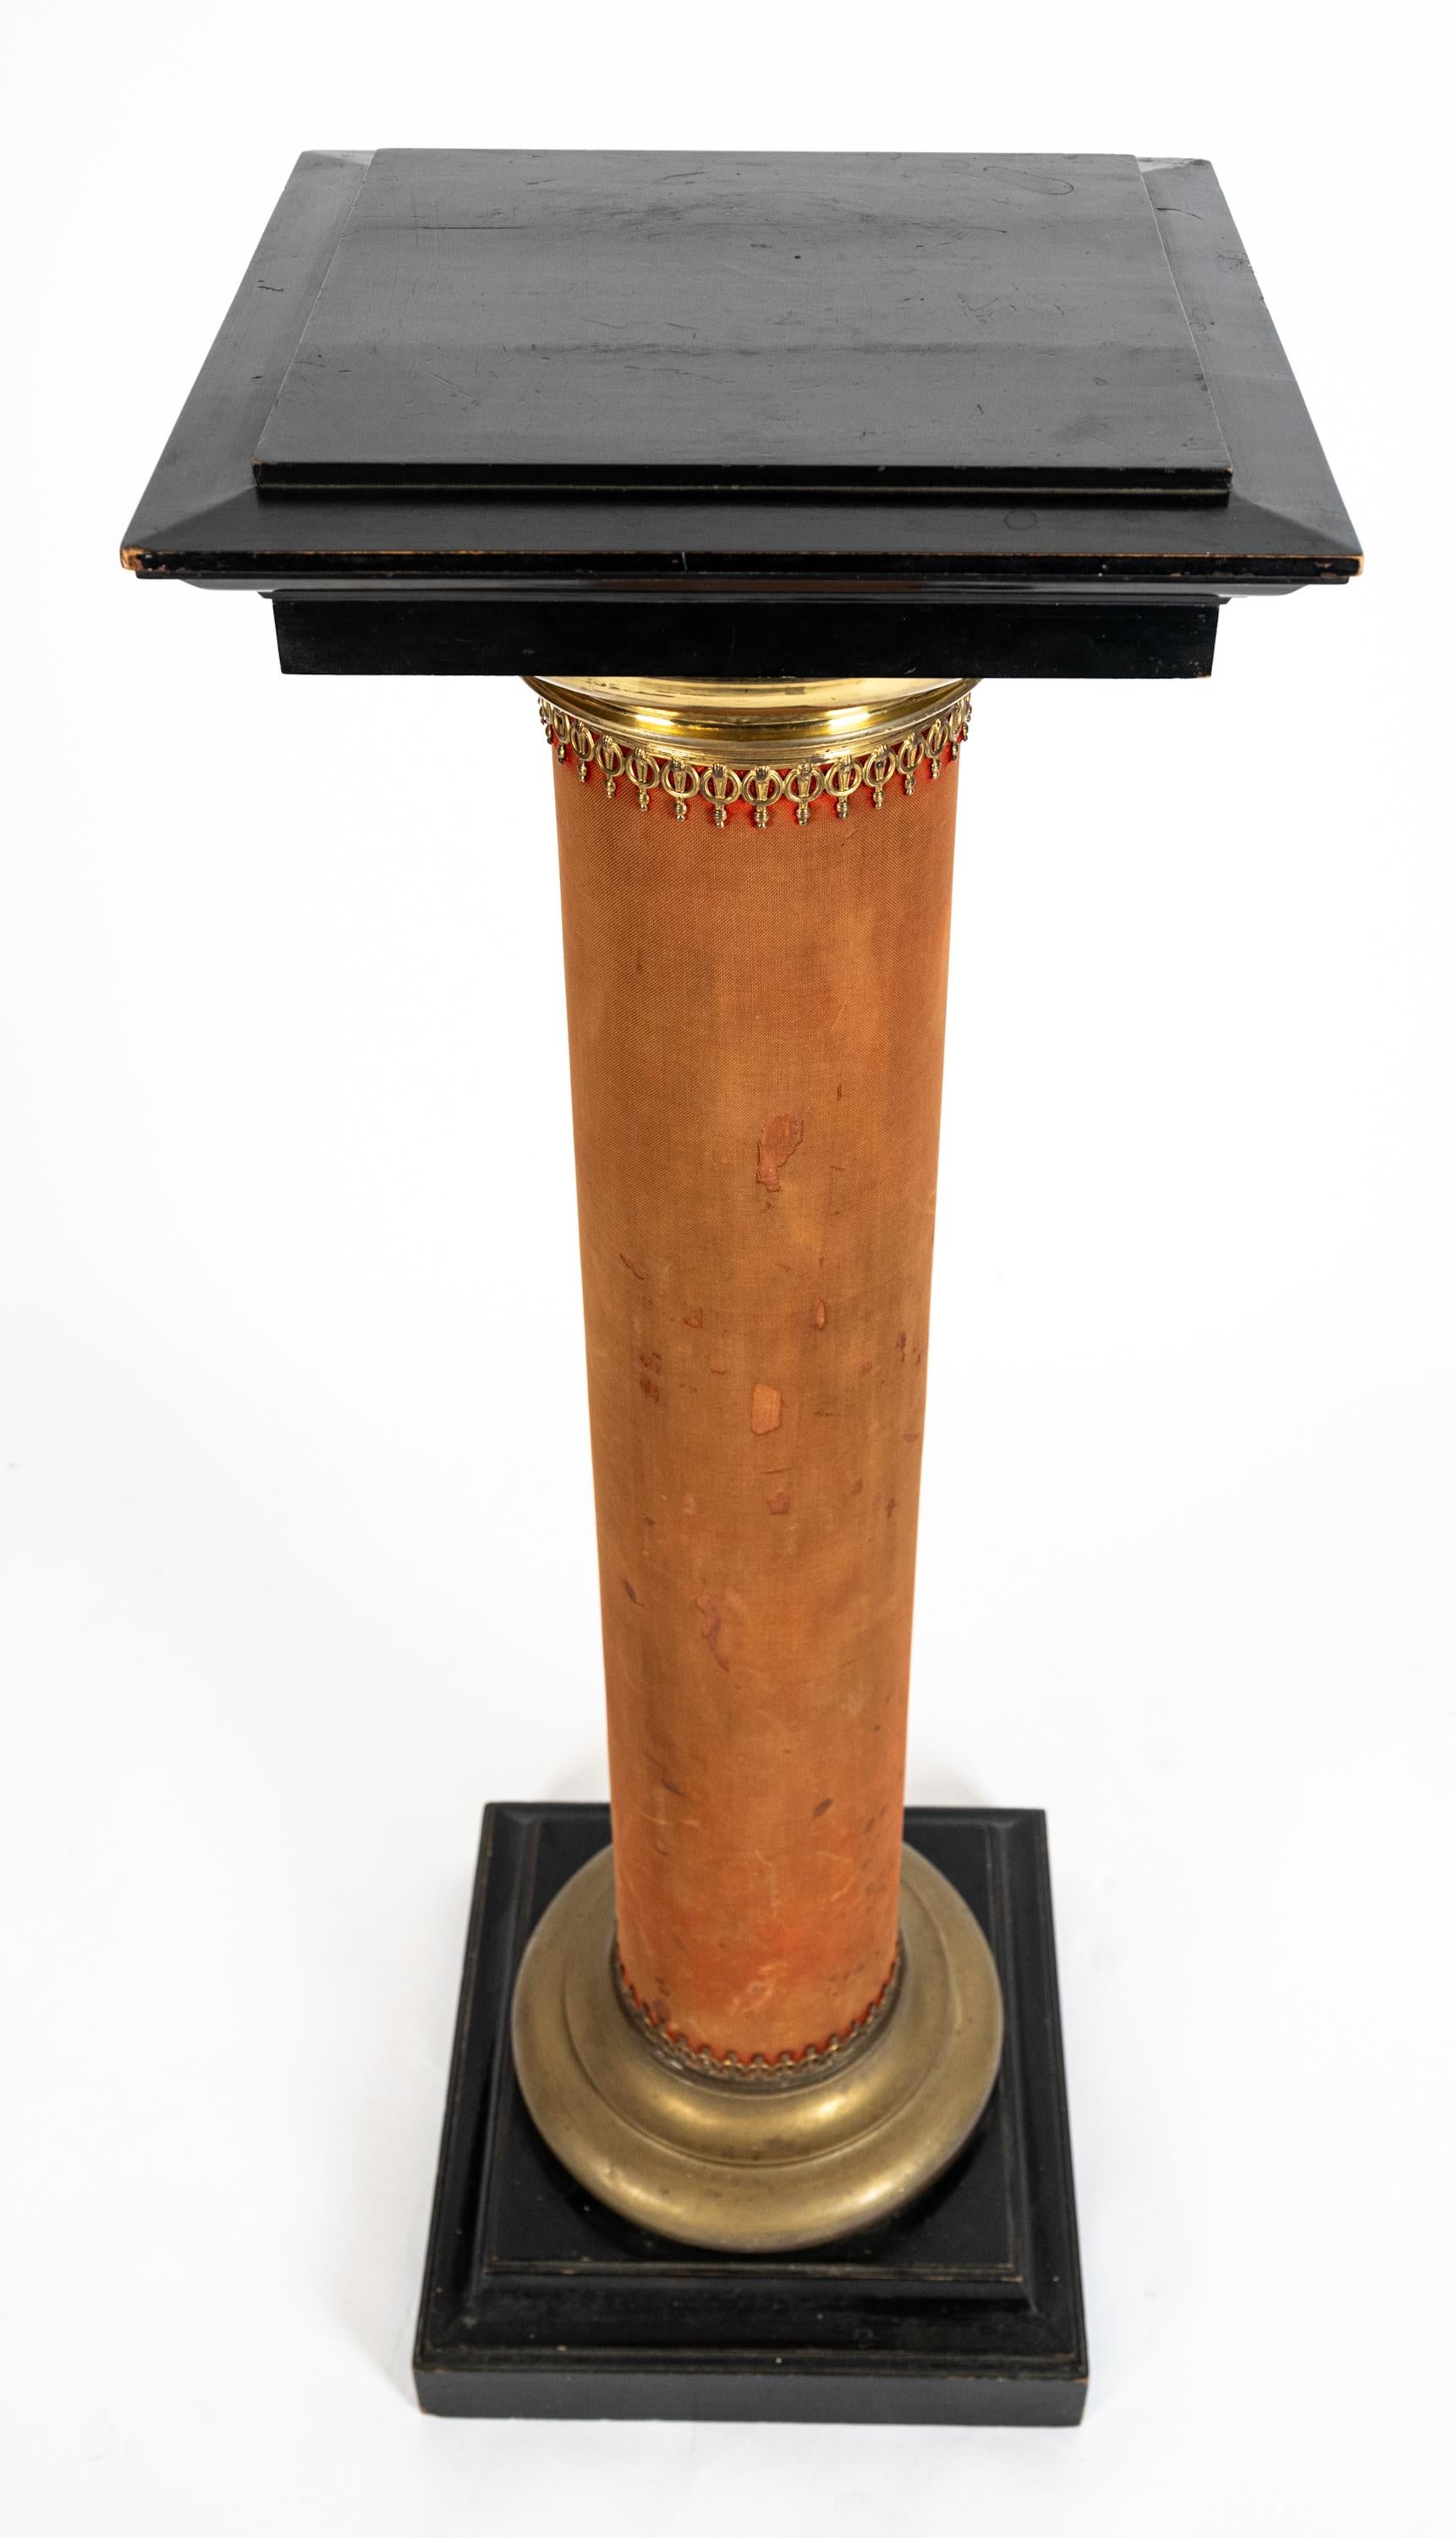 Late 19th century French column having ebonized wood on a square base and top. With worn red silk velvet, and bronze filigree on the top and bottom molded edges along the base of each column. circa 1880s.